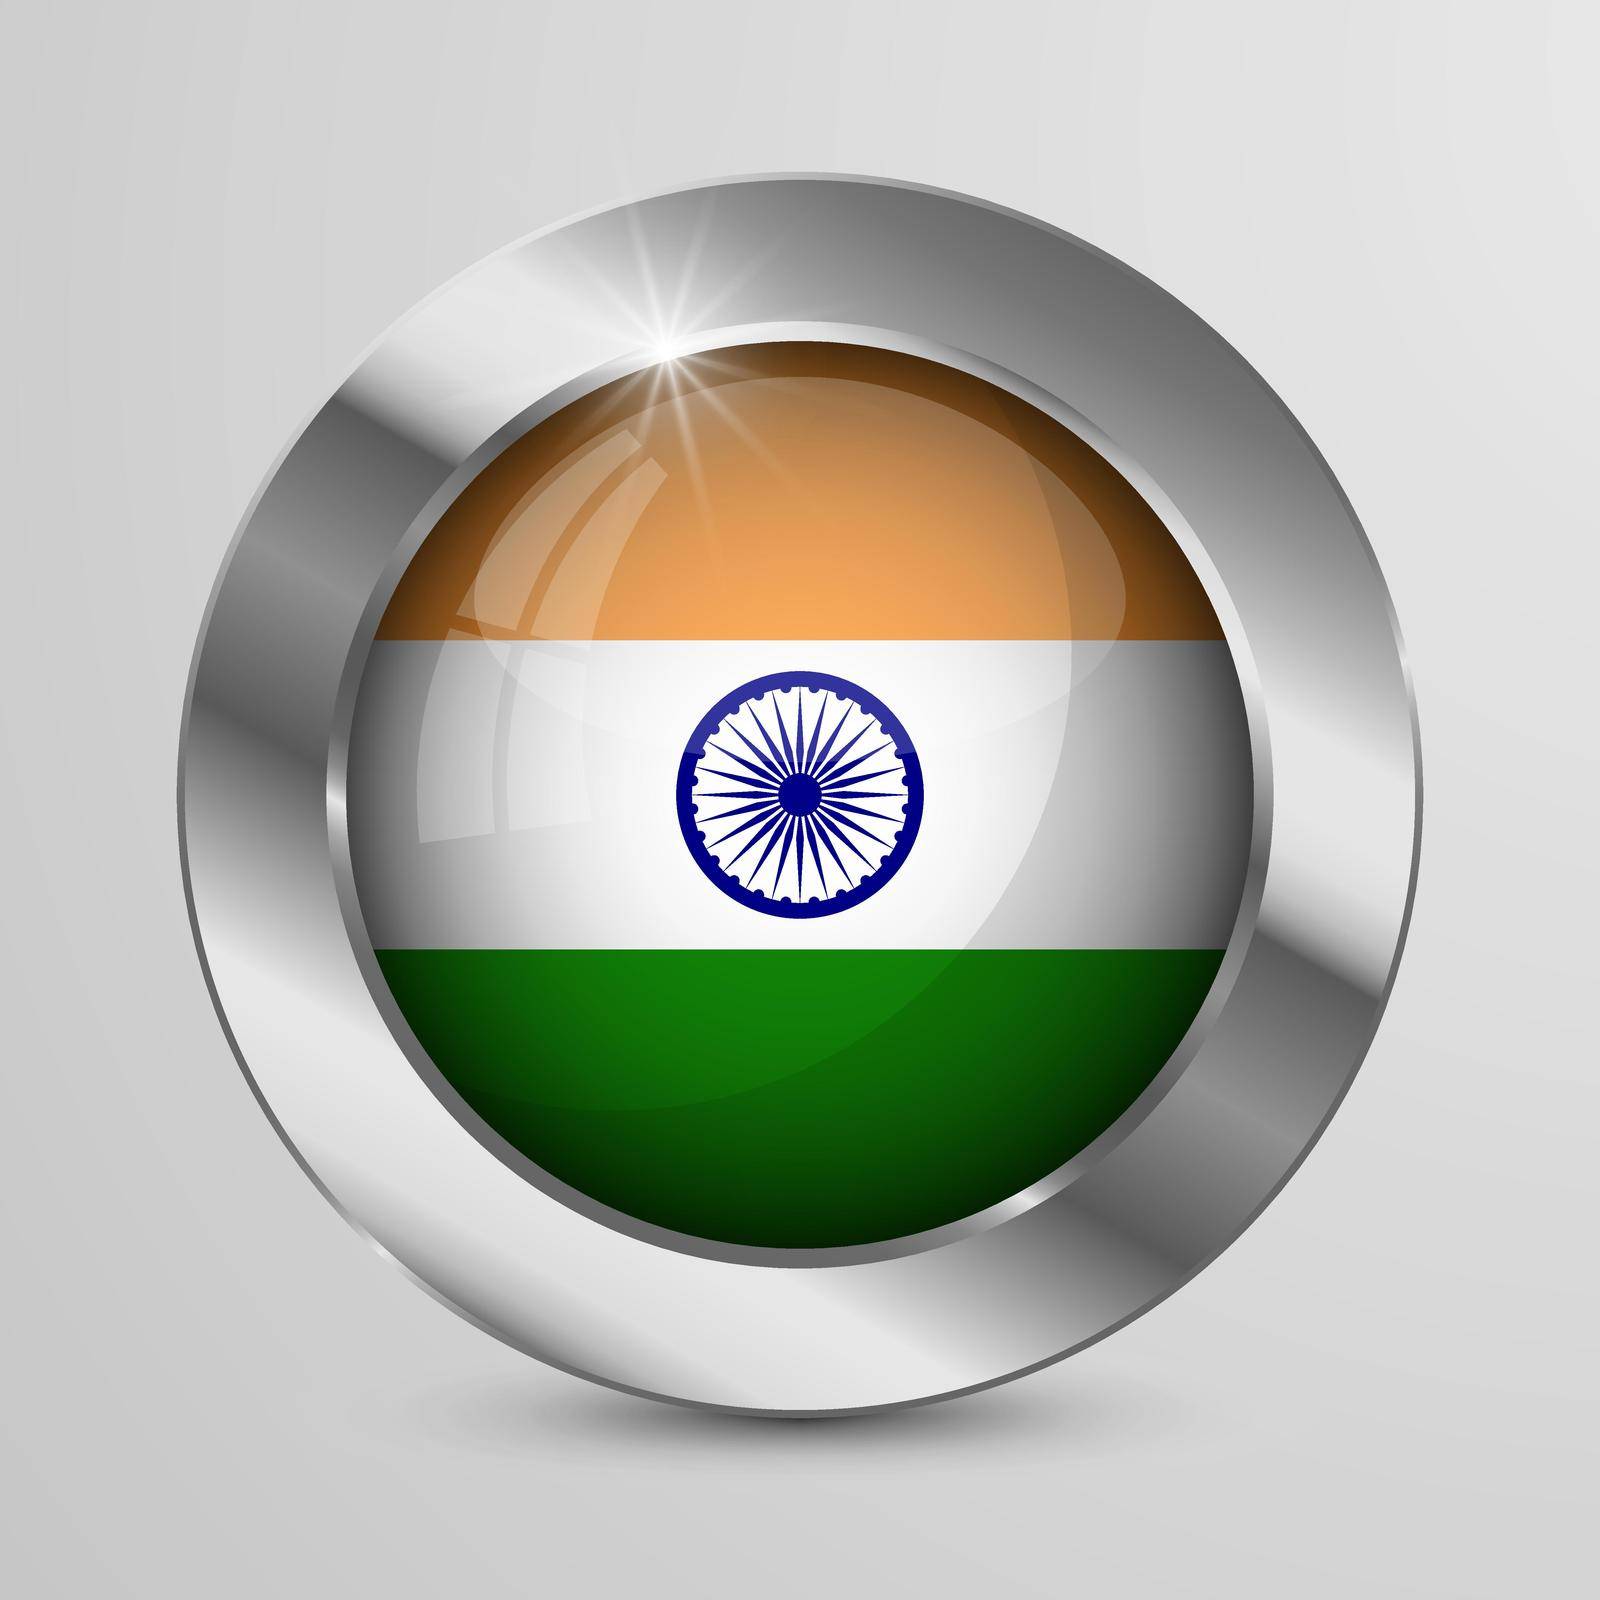 EPS10 Vector Patriotic Button with India flag colors. An element of impact for the use you want to make of it.